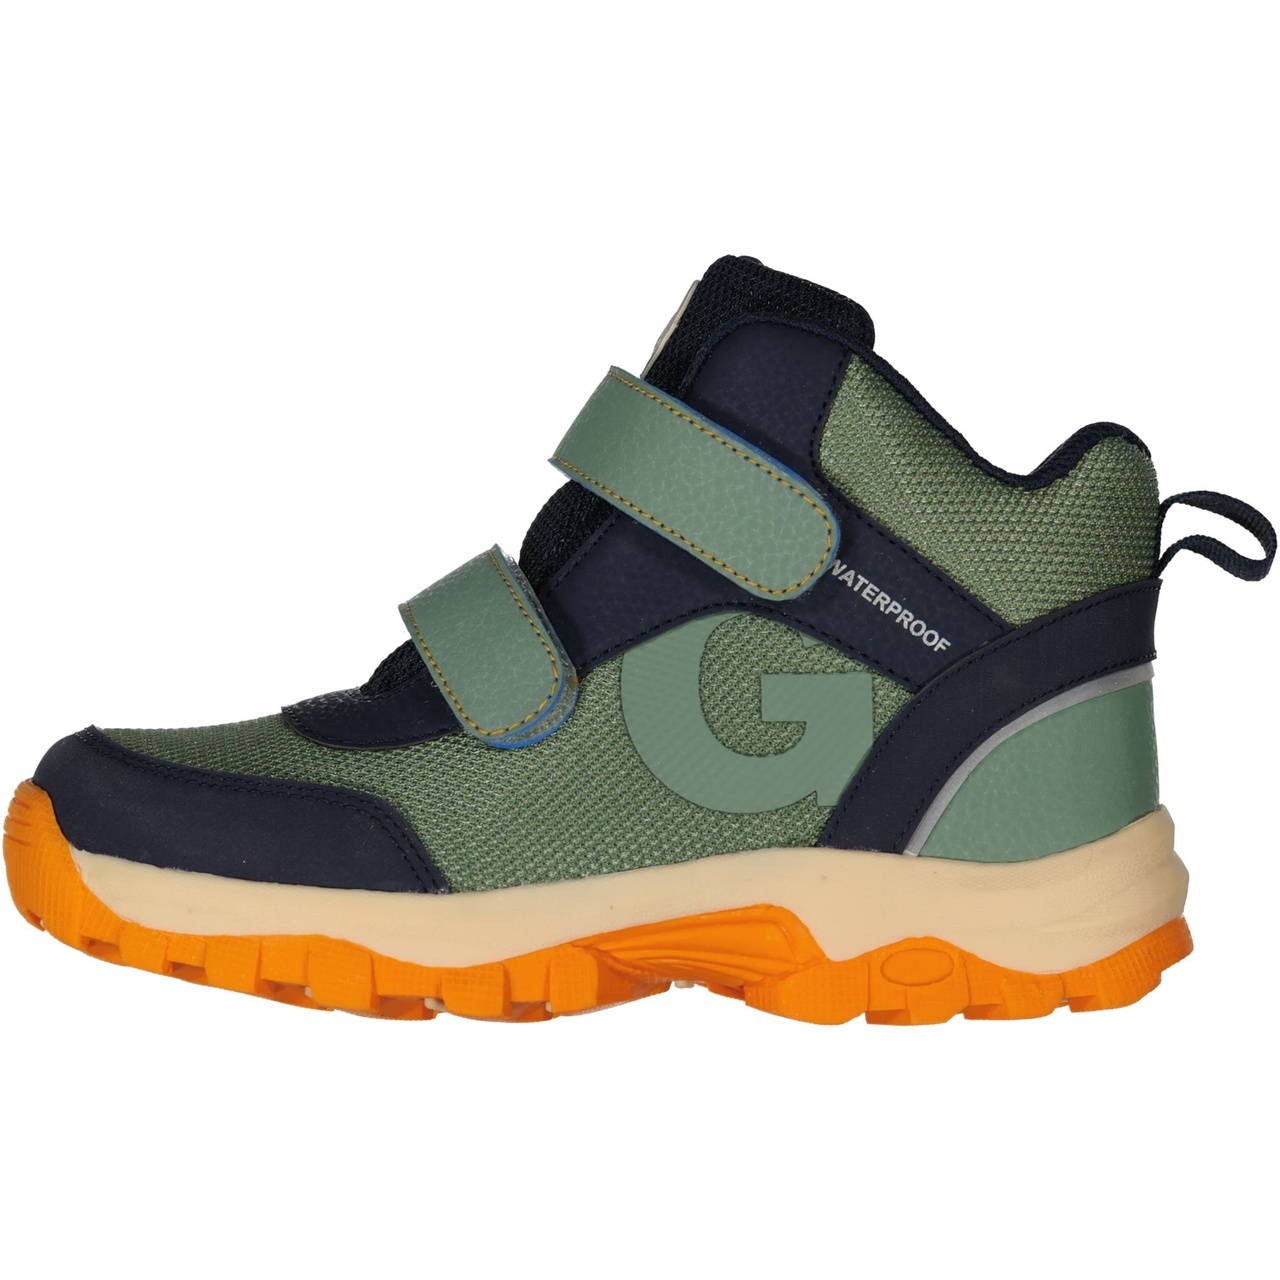 All weather shoes Moss green  32 (20,5 cm)